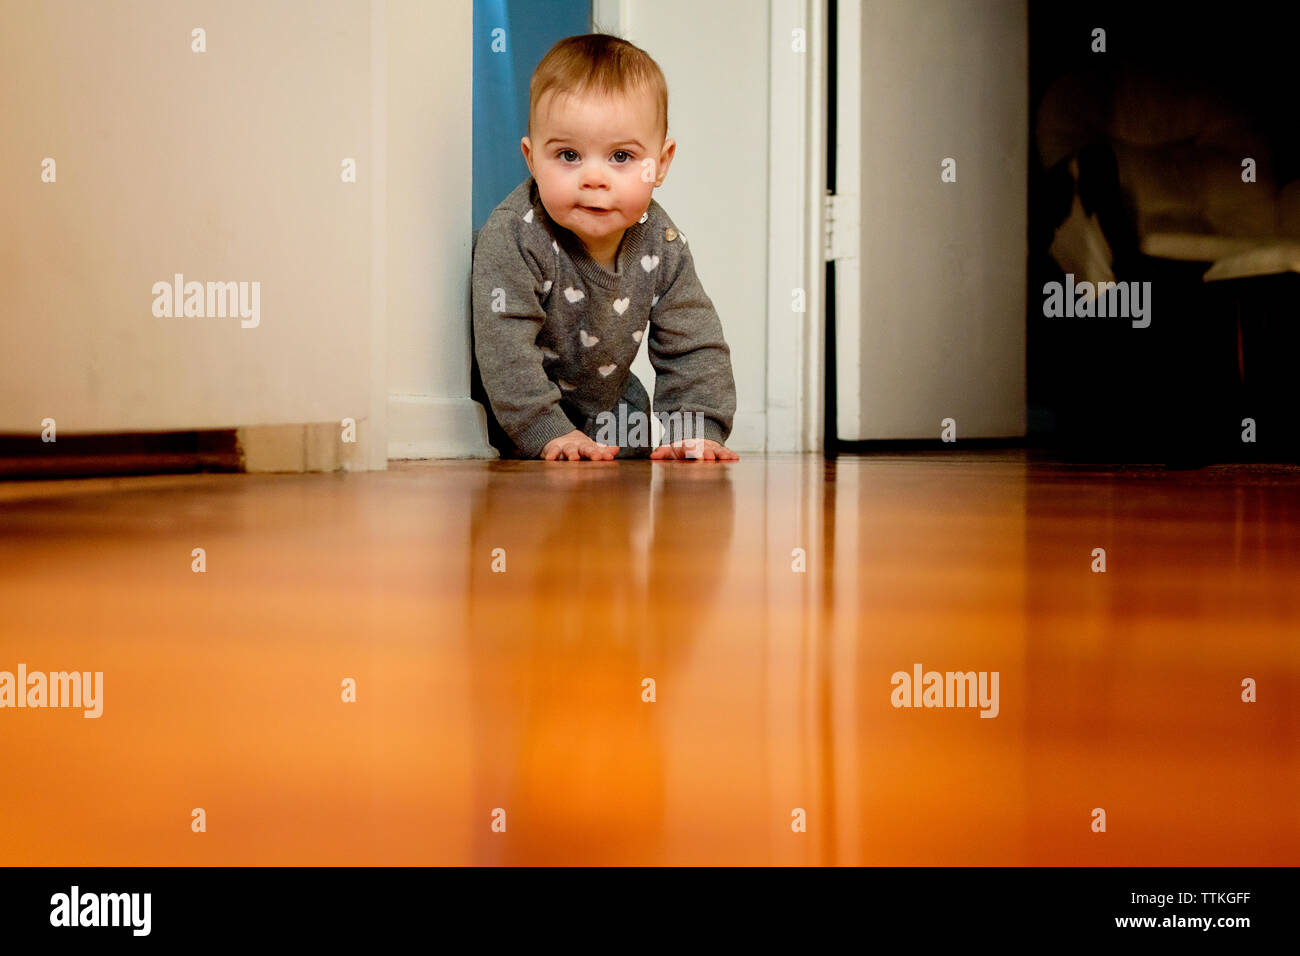 A baby girl crawling on the floor past a door way Stock Photo